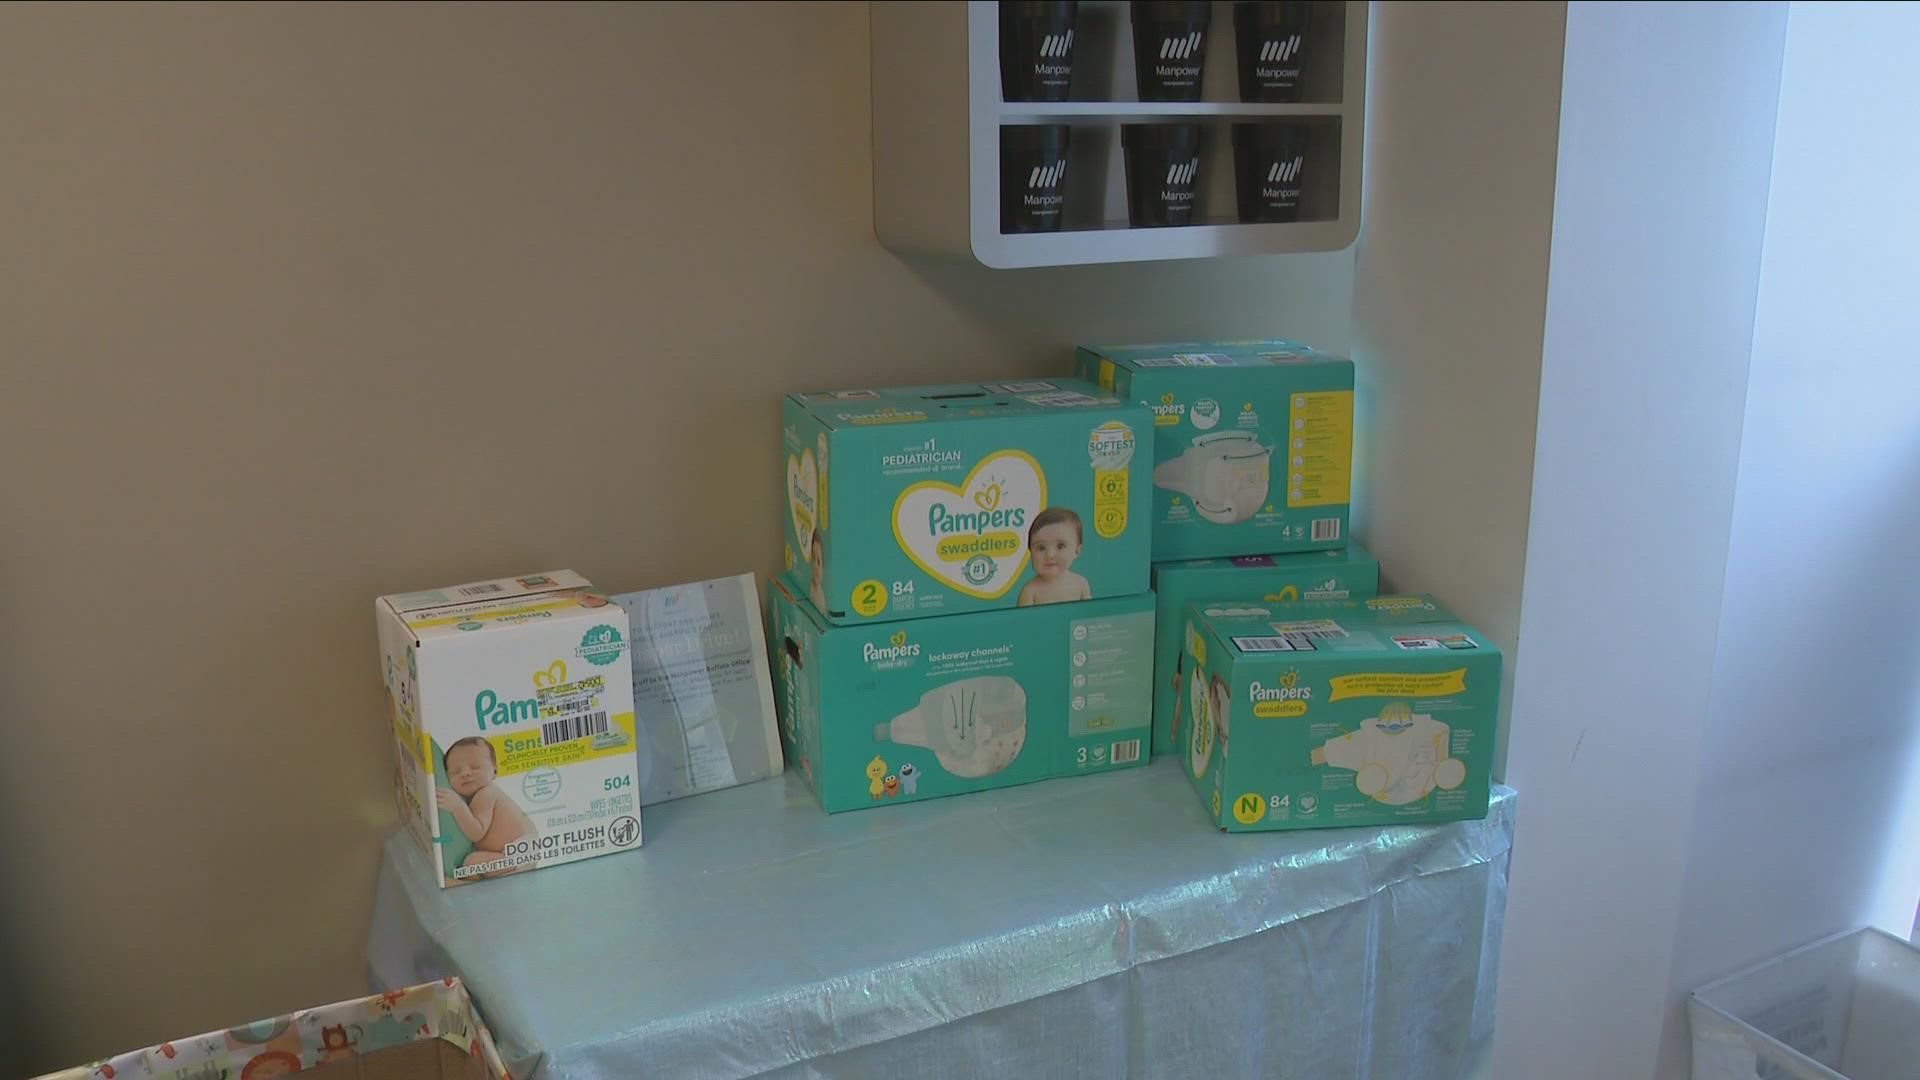 Today Manpower Buffalo kicked off a three-day diaper drive for Abdul's family... as a way to help support them, and baby.